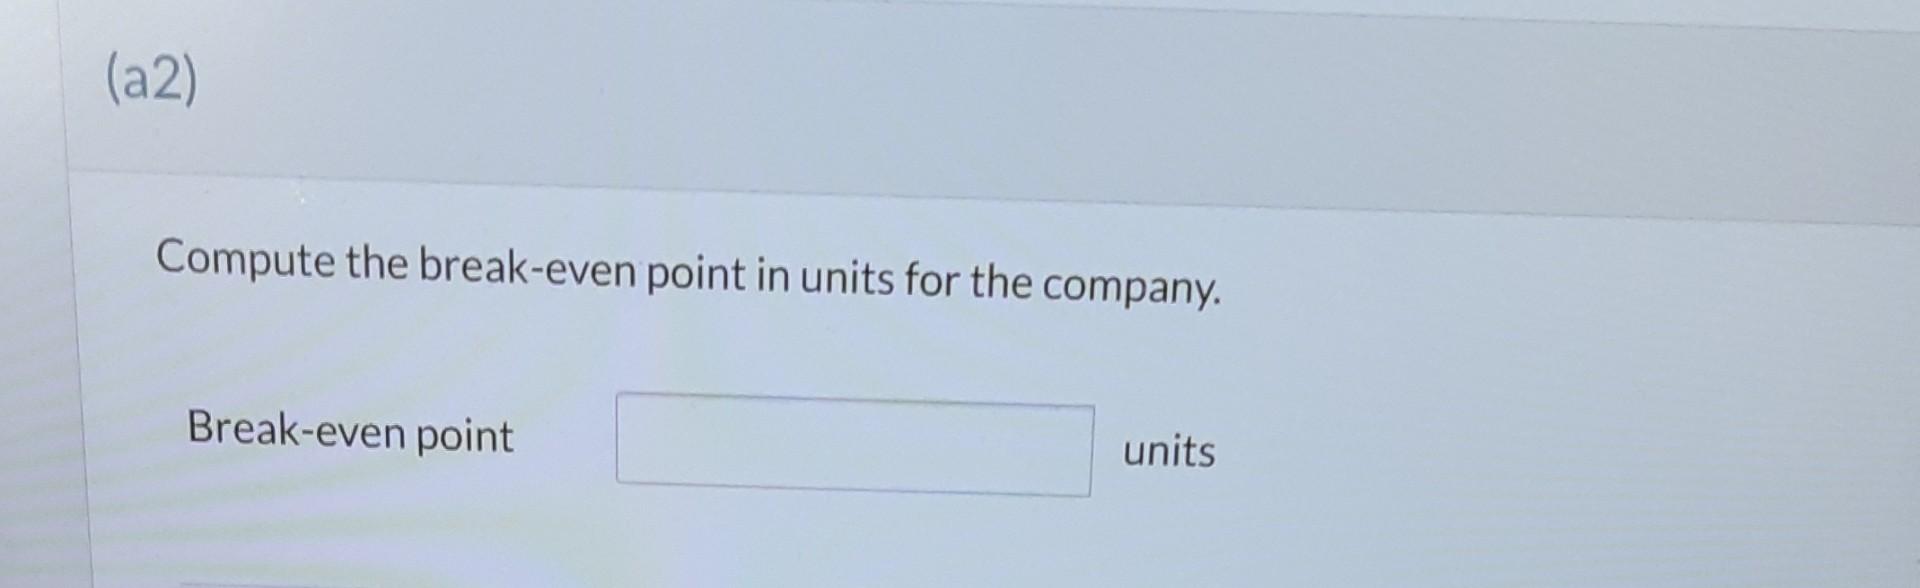 (a2) Compute the break-even point in units for the company. Break-even point units